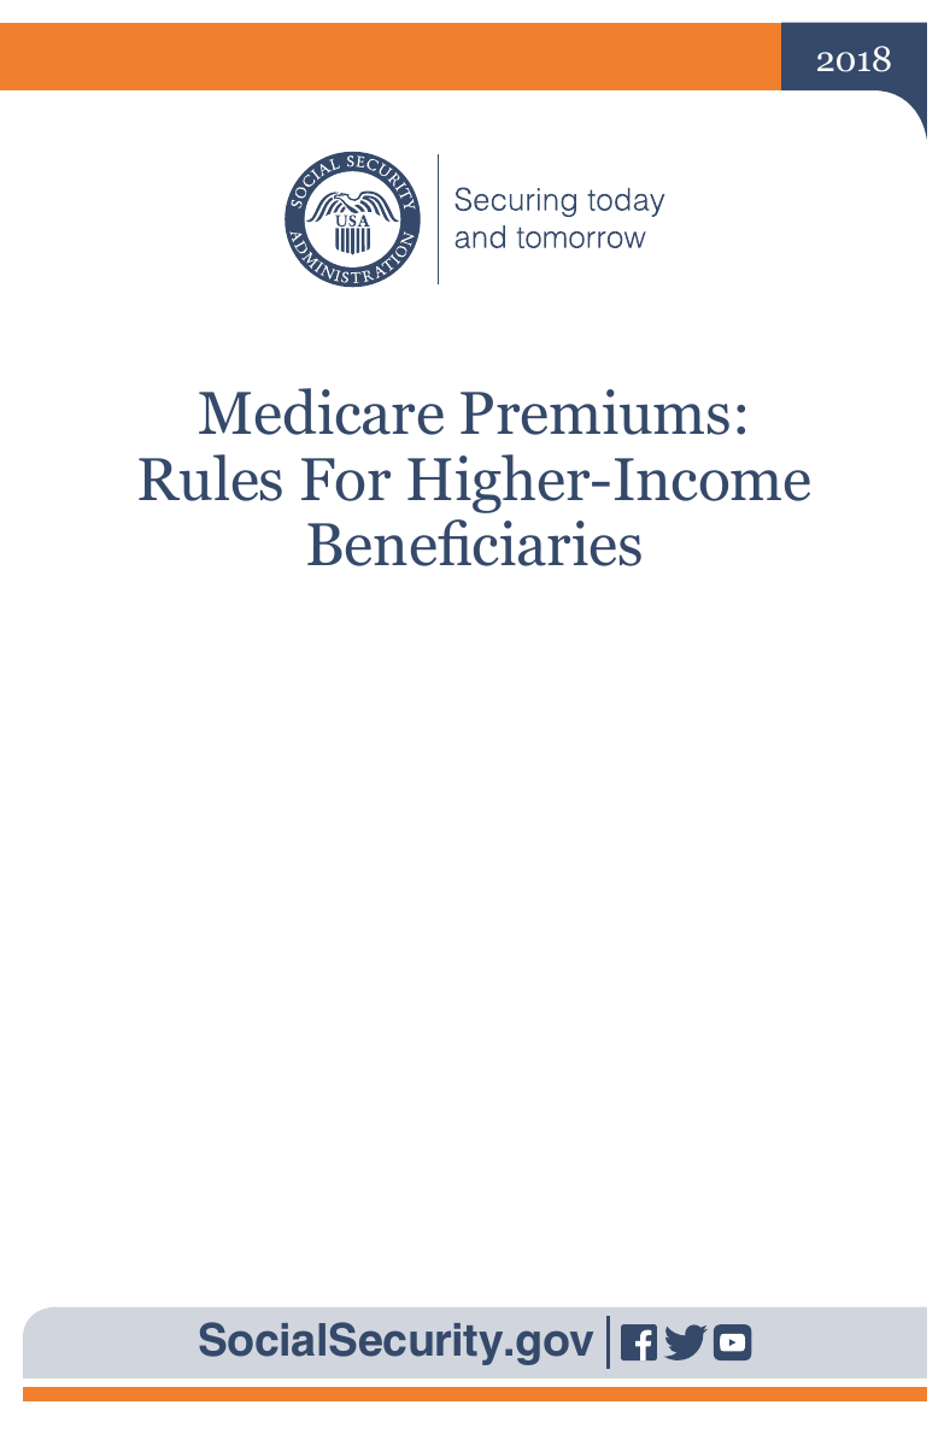 2018 Medicare Premiums Rules for Beneficiaries Fill